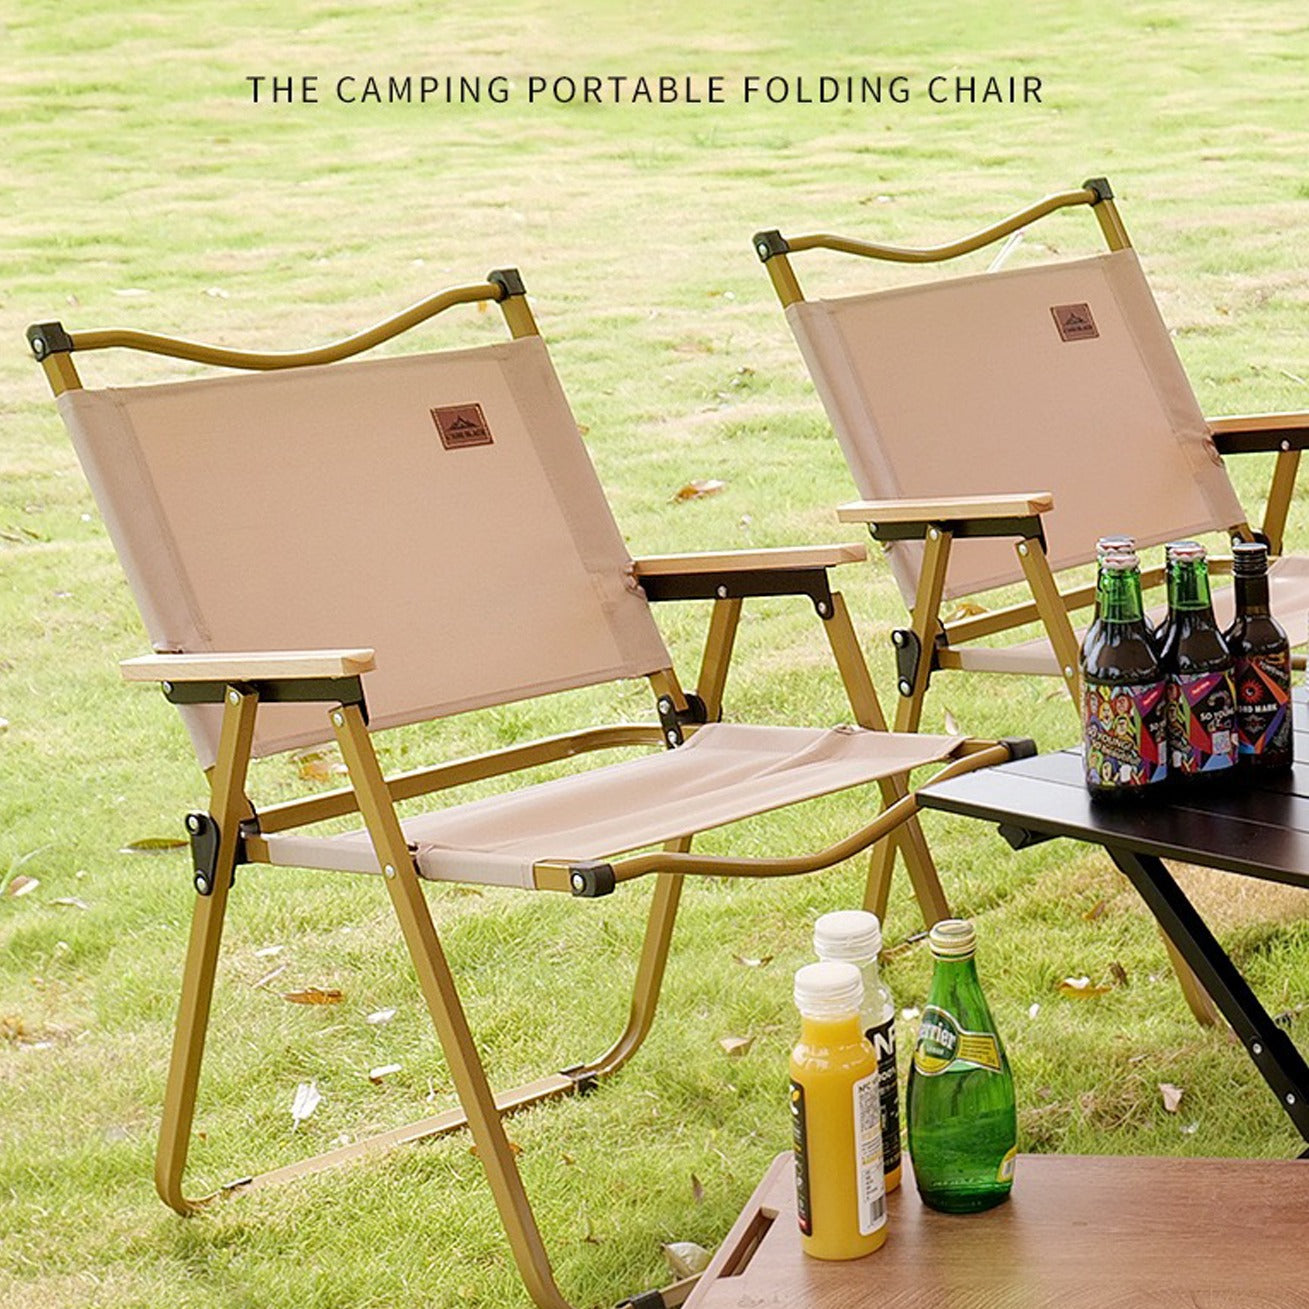 Portable Outdoor Camping Folding Chair, Kermit Chair